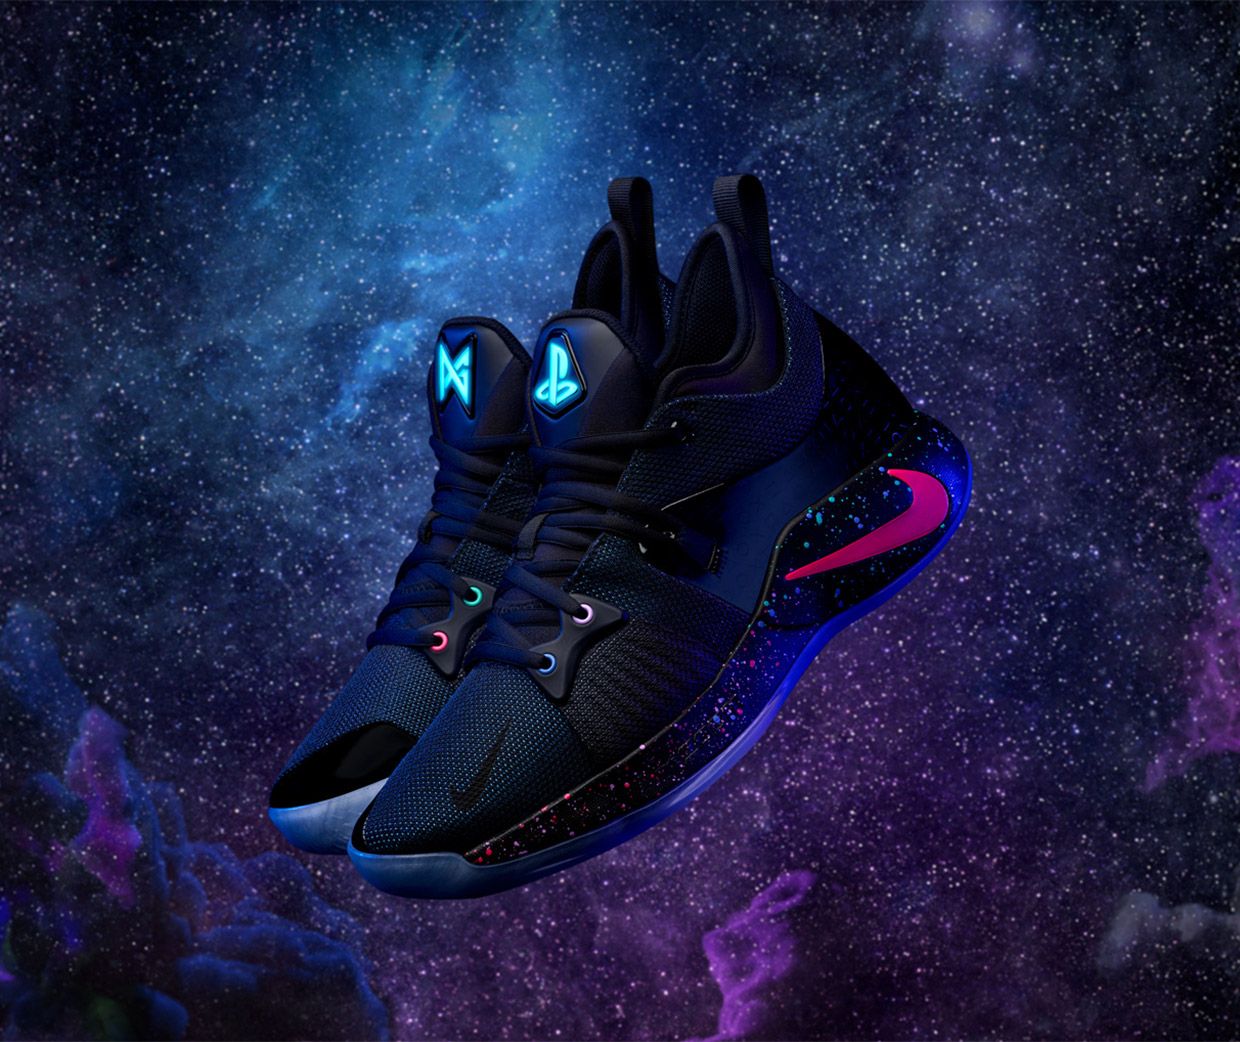 Nike PG2 PlayStation Sneakers Have DualSock Support